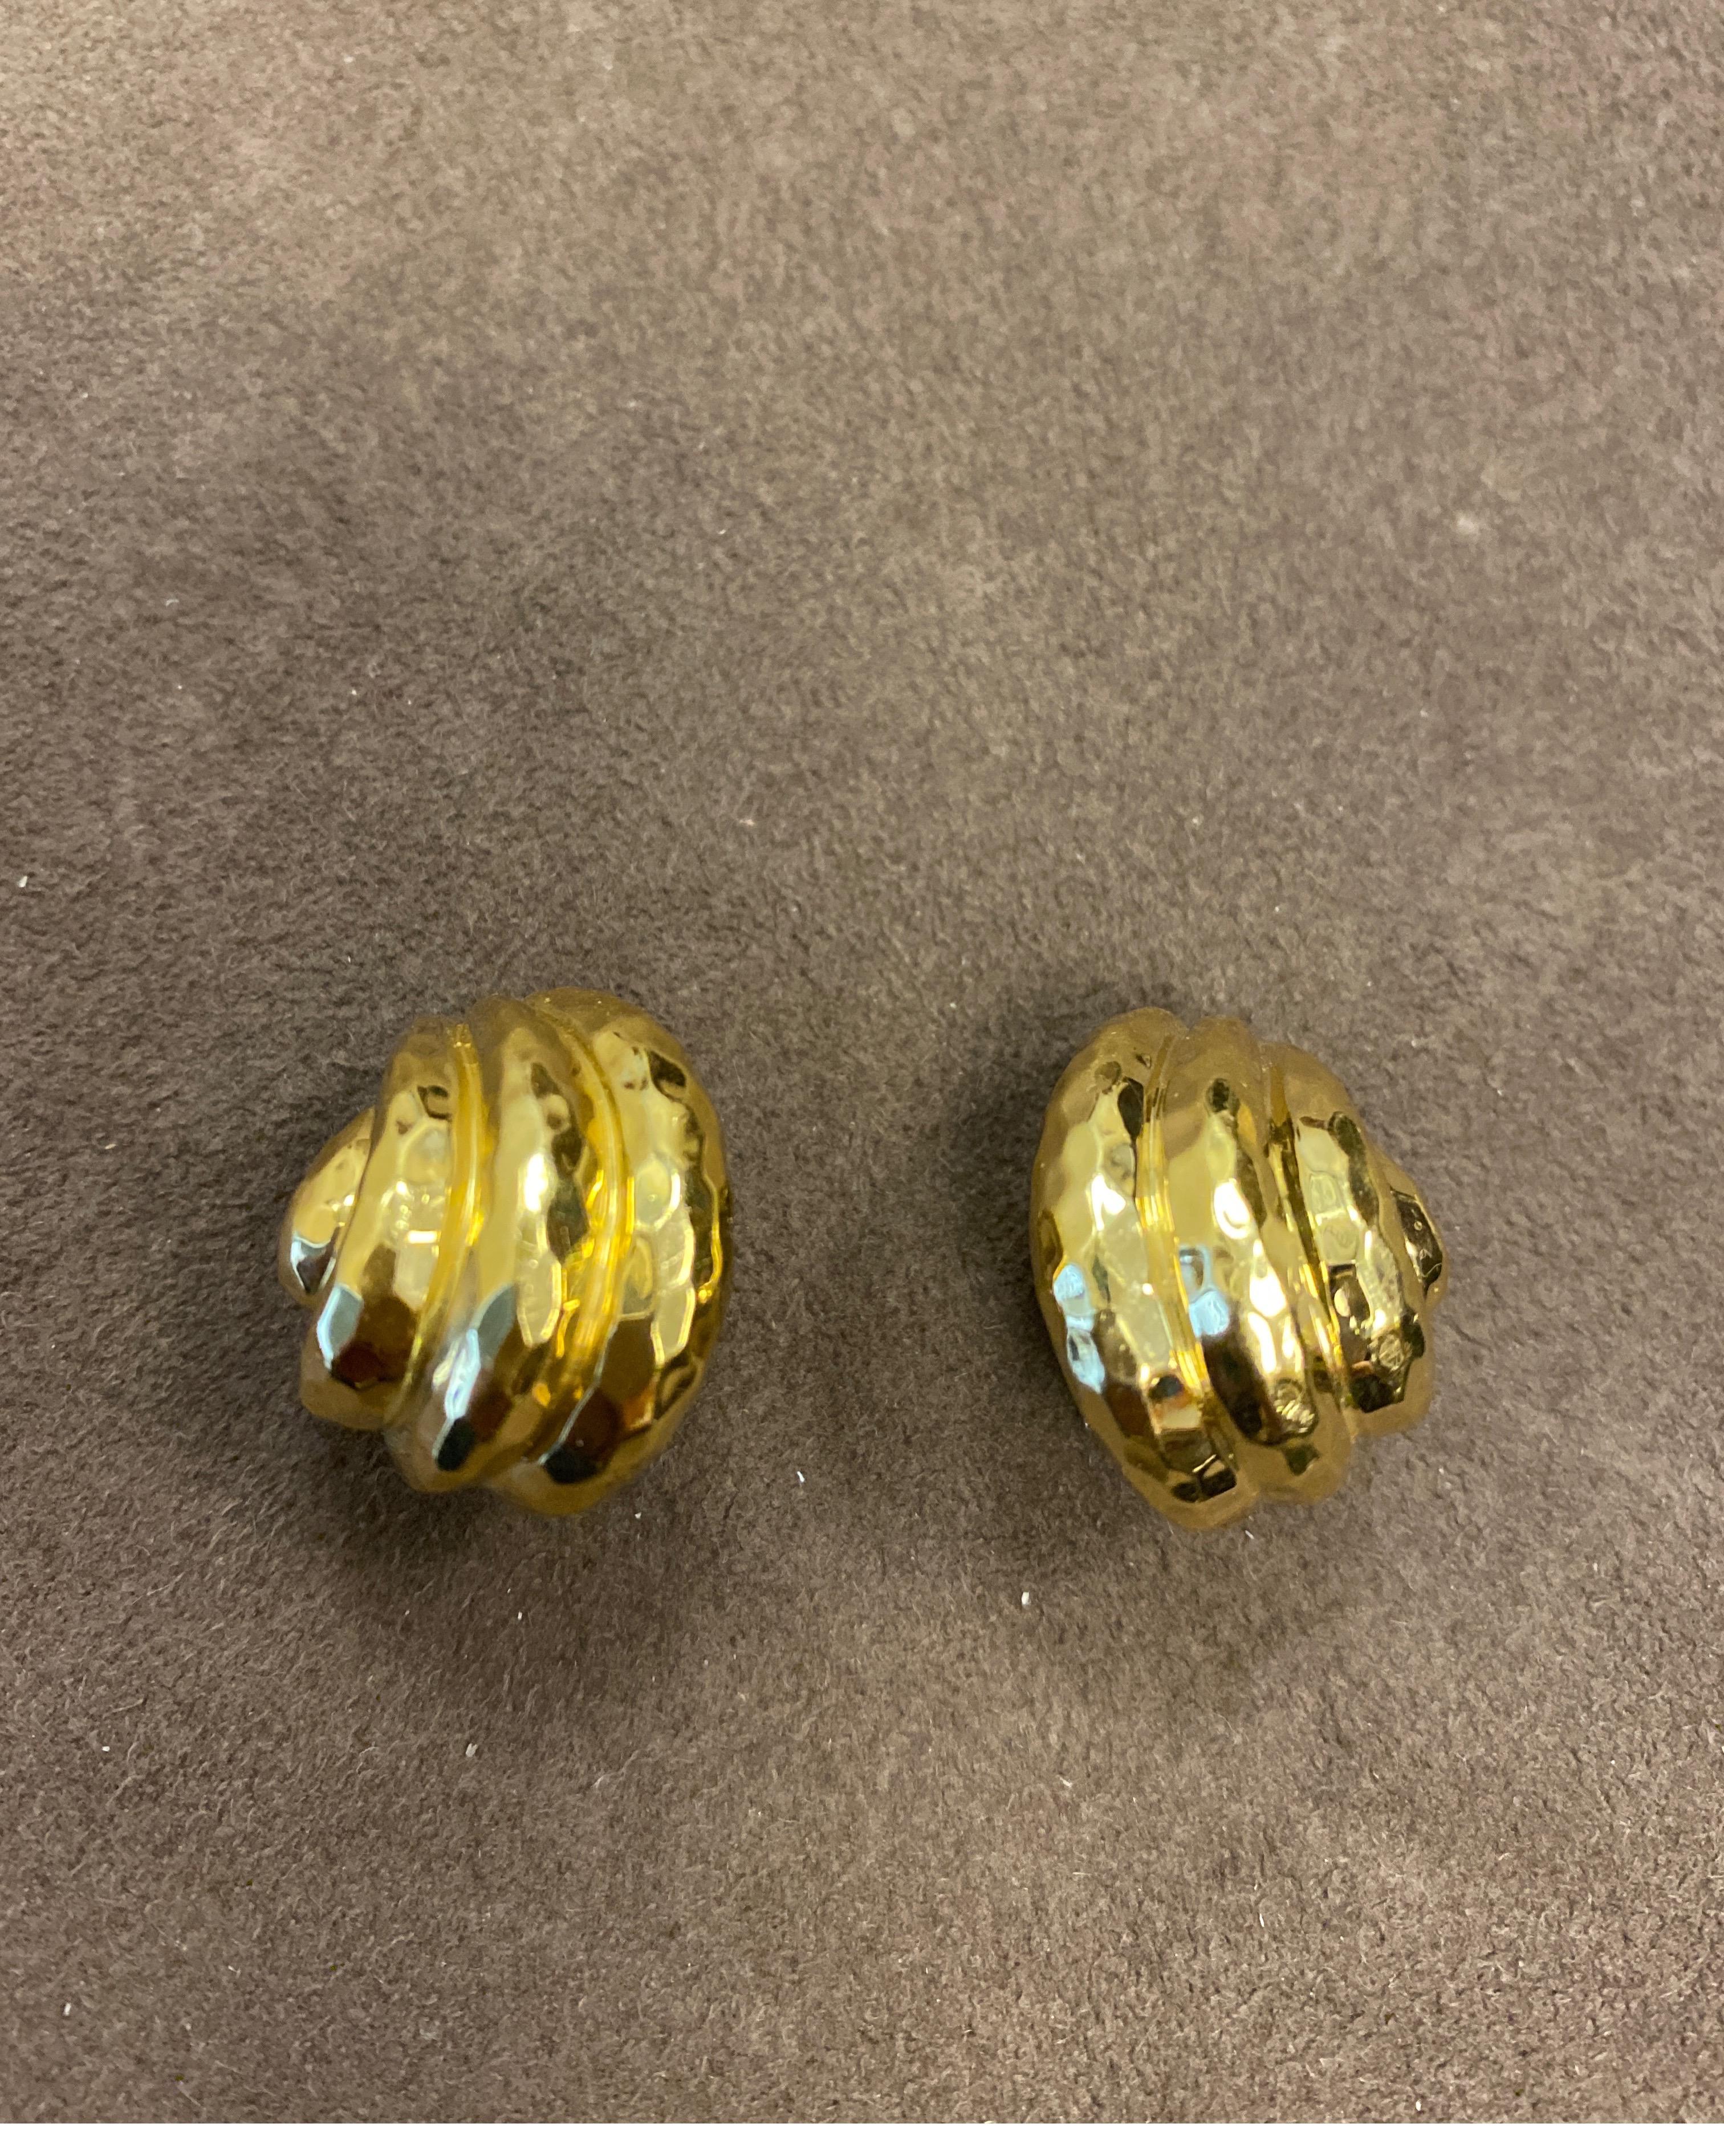 Henry Dunay 18K yellow gold earclips.
Last retail $3500
Brand new, never worn